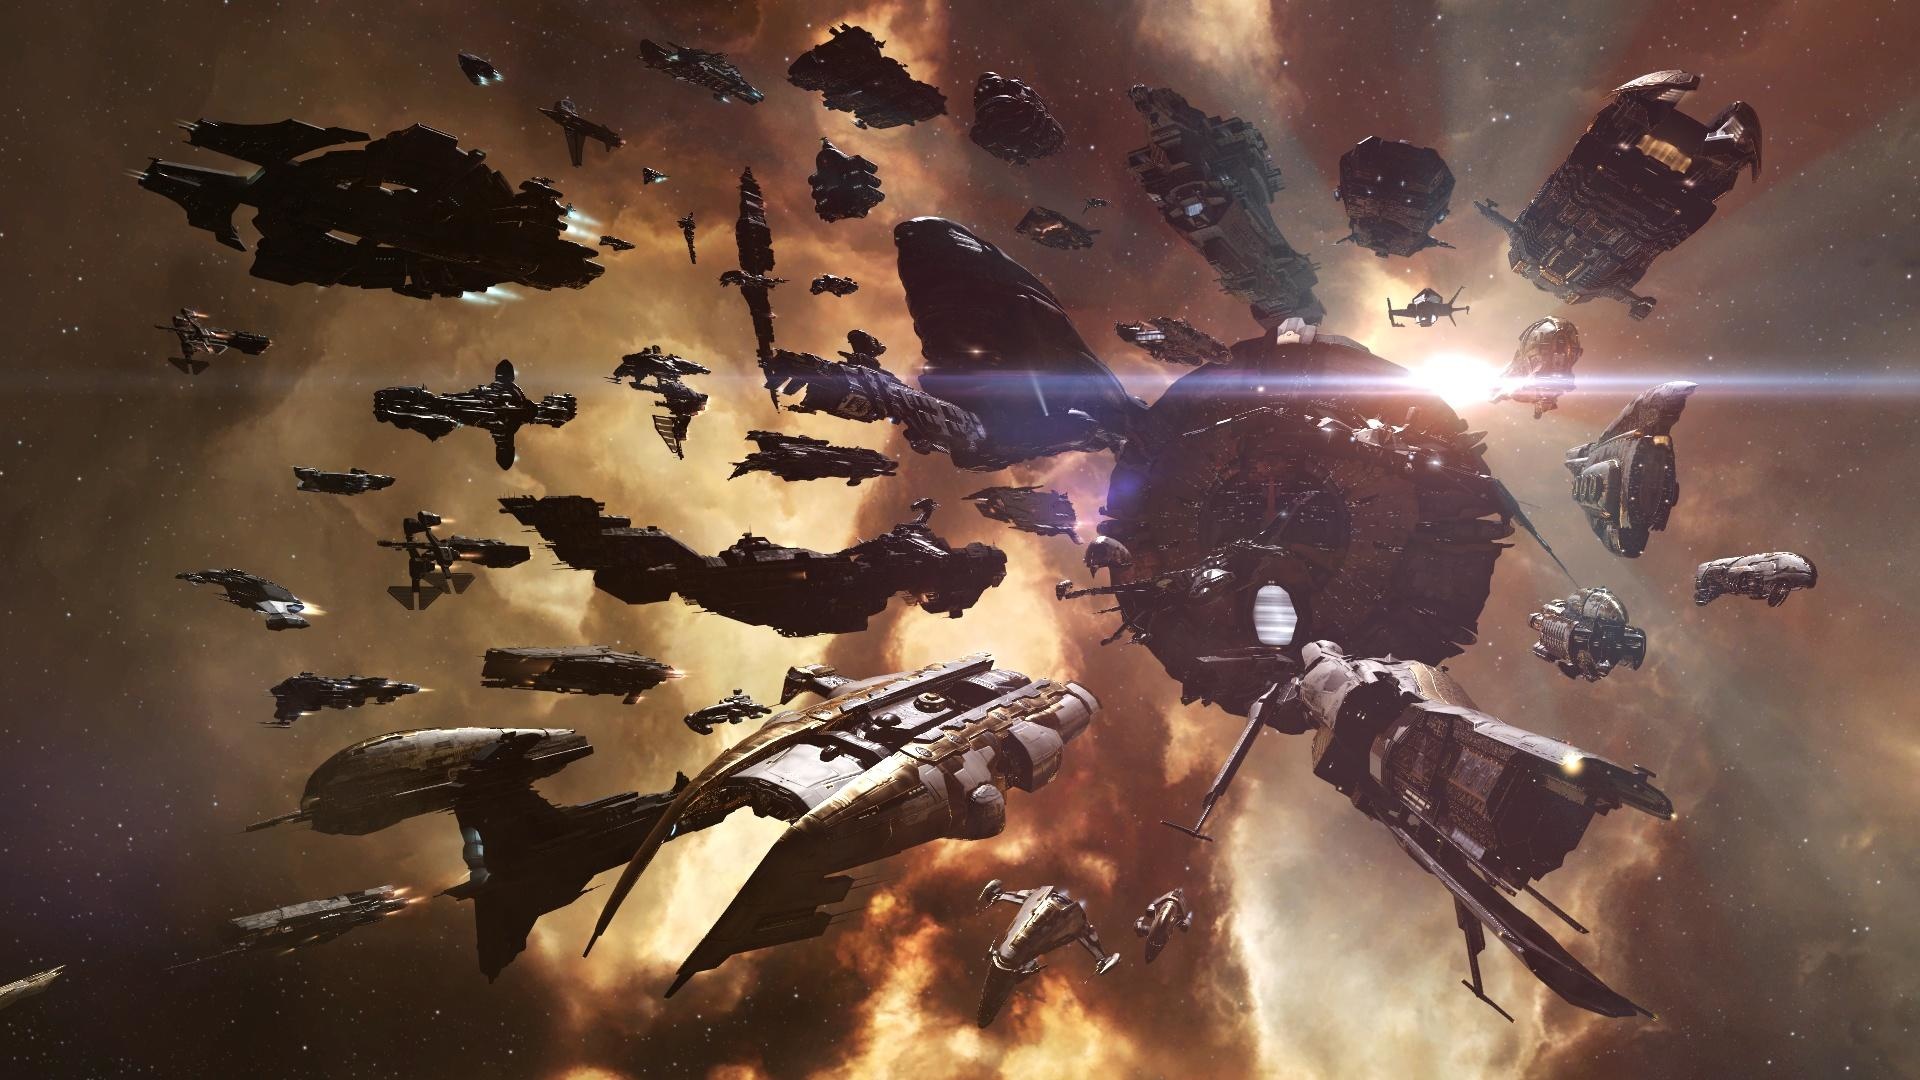 (Since in Eve most of the community plays on one server, gigantic mass battles are possible. Wars break out between the largest alliances from time to time and last for months.)